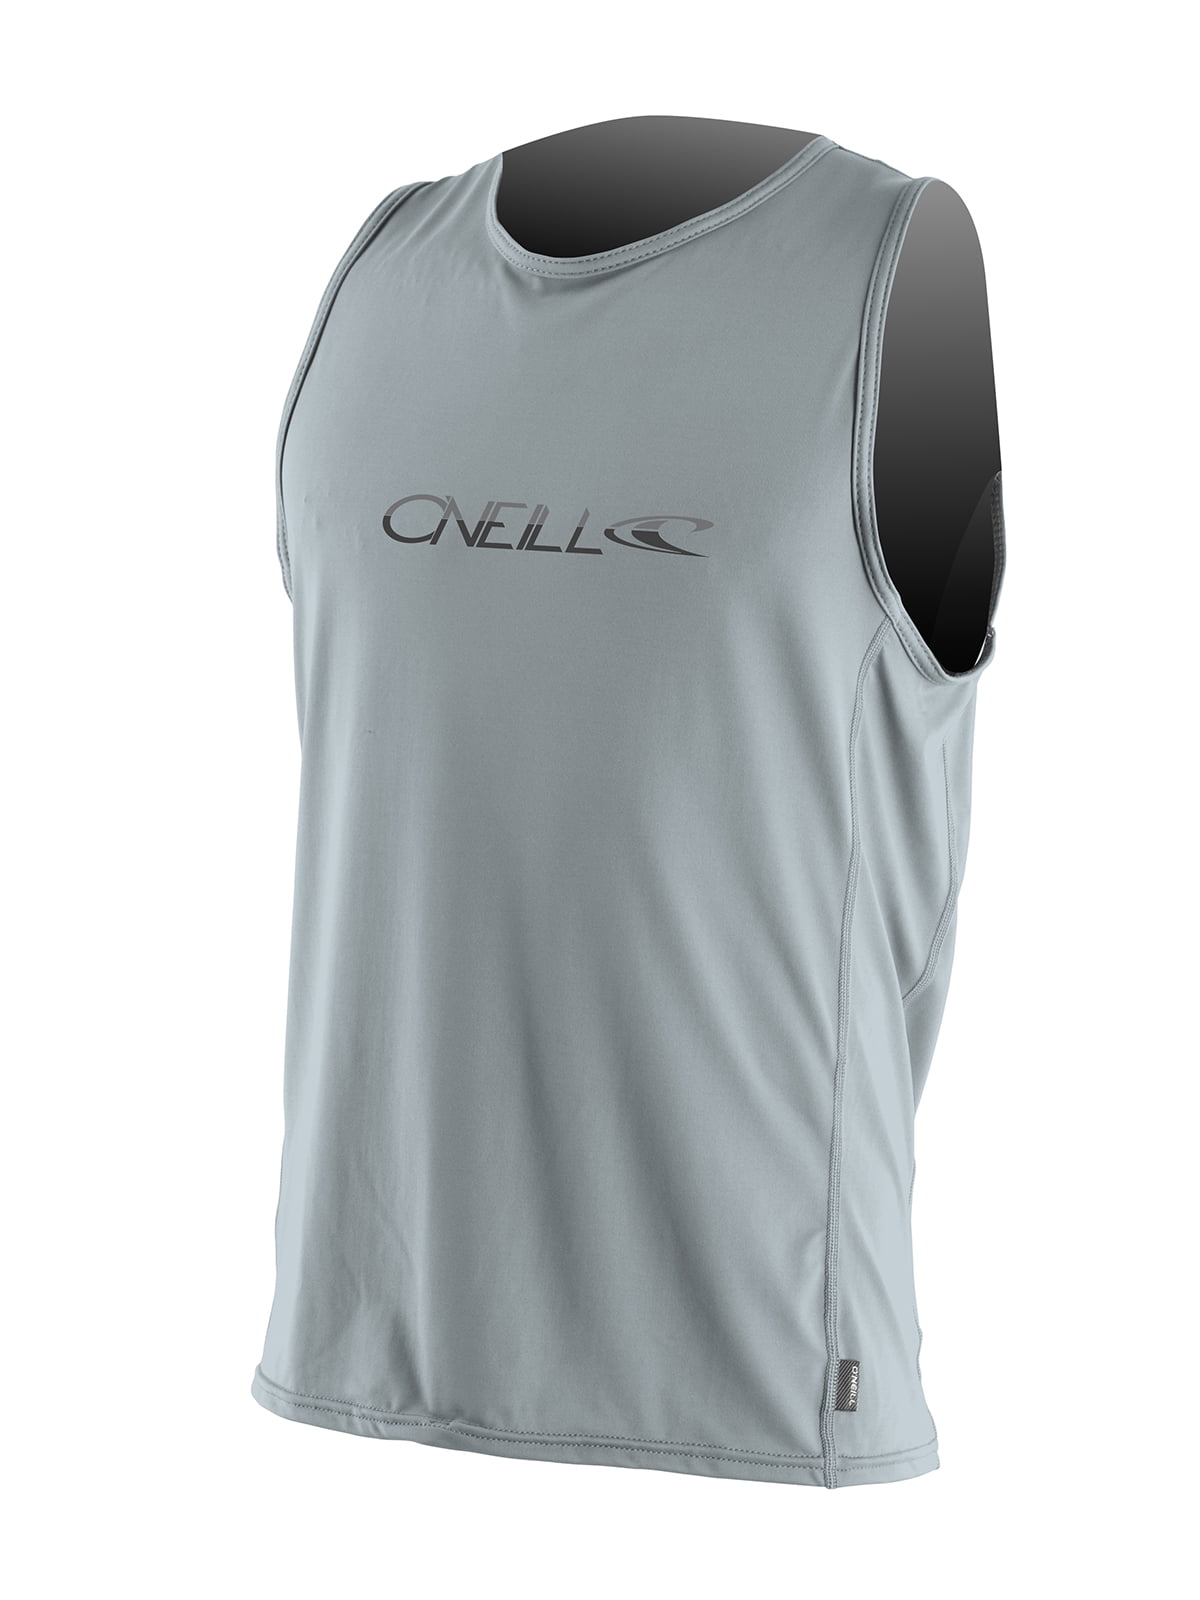 Loose fit ONeill mens 24/7 sleeveless breathable shirt SPF 30